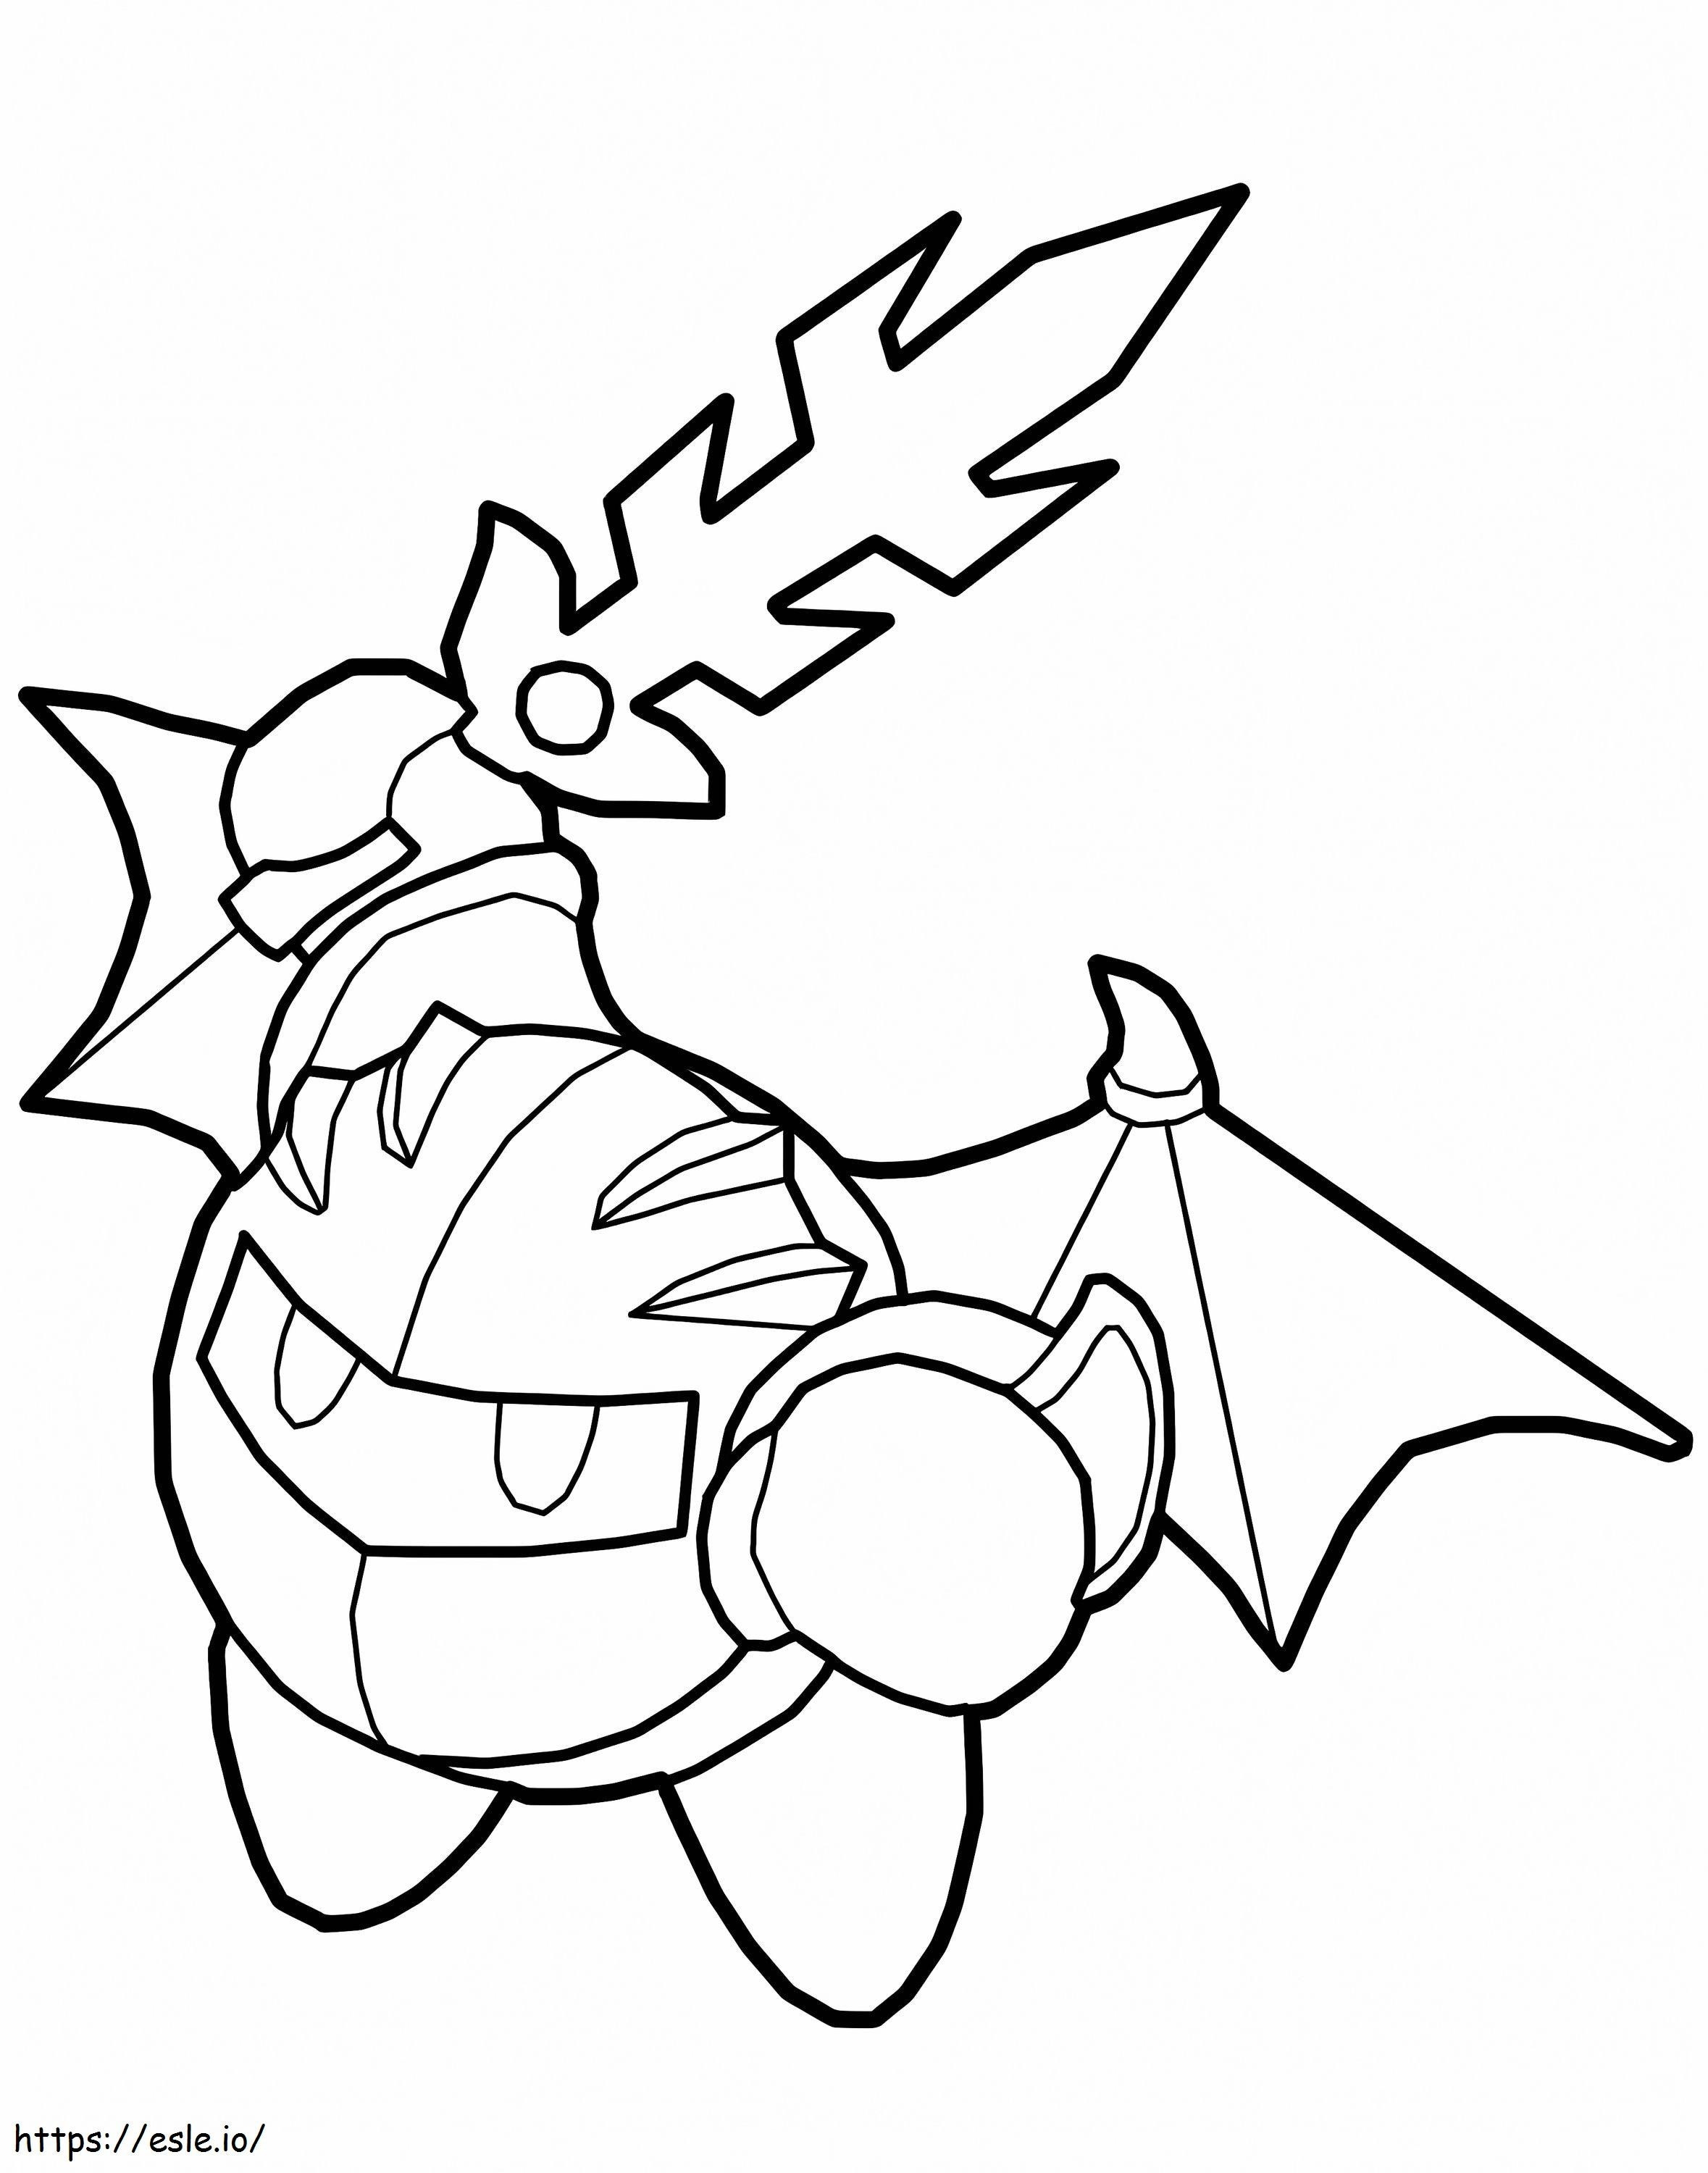 Meta Knight 5 coloring page